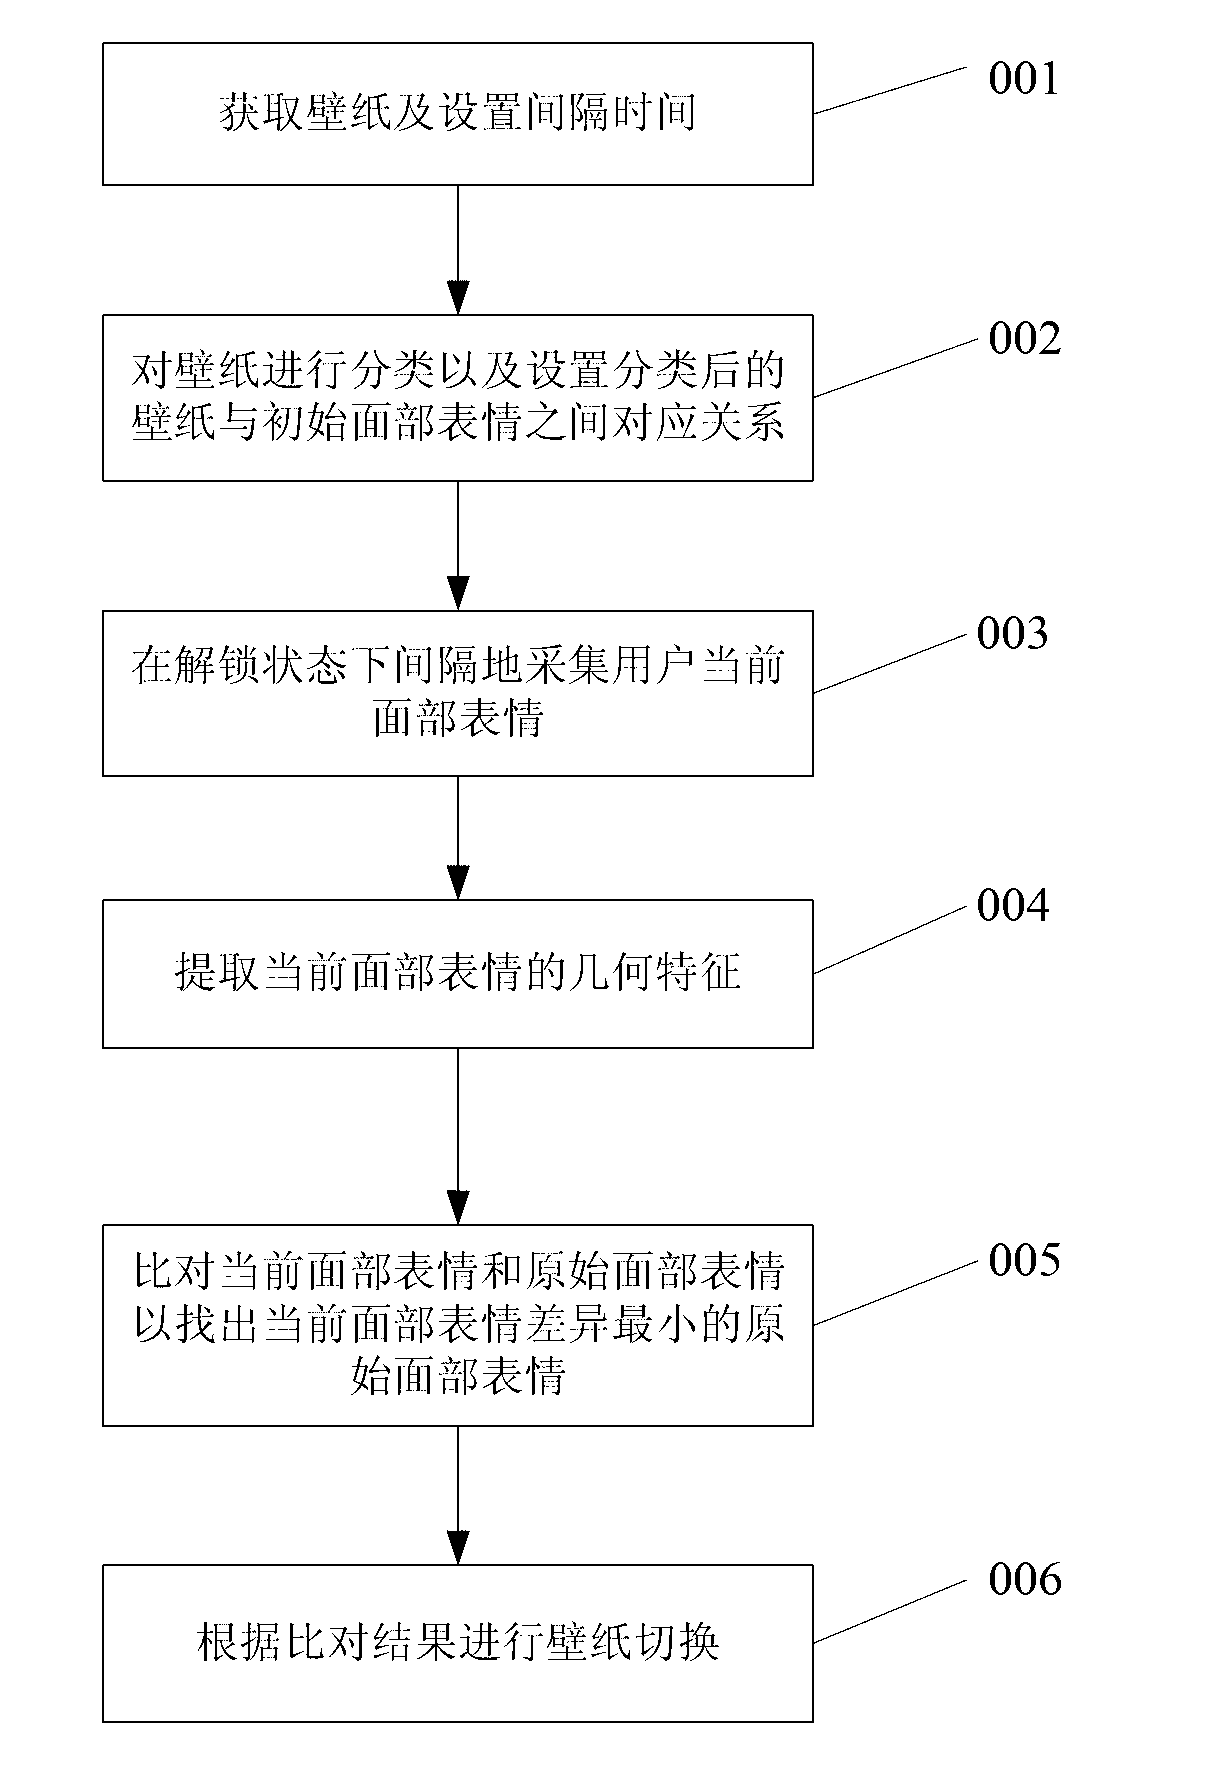 Mobile terminal and method for automatically switching wall paper based on facial expression recognition